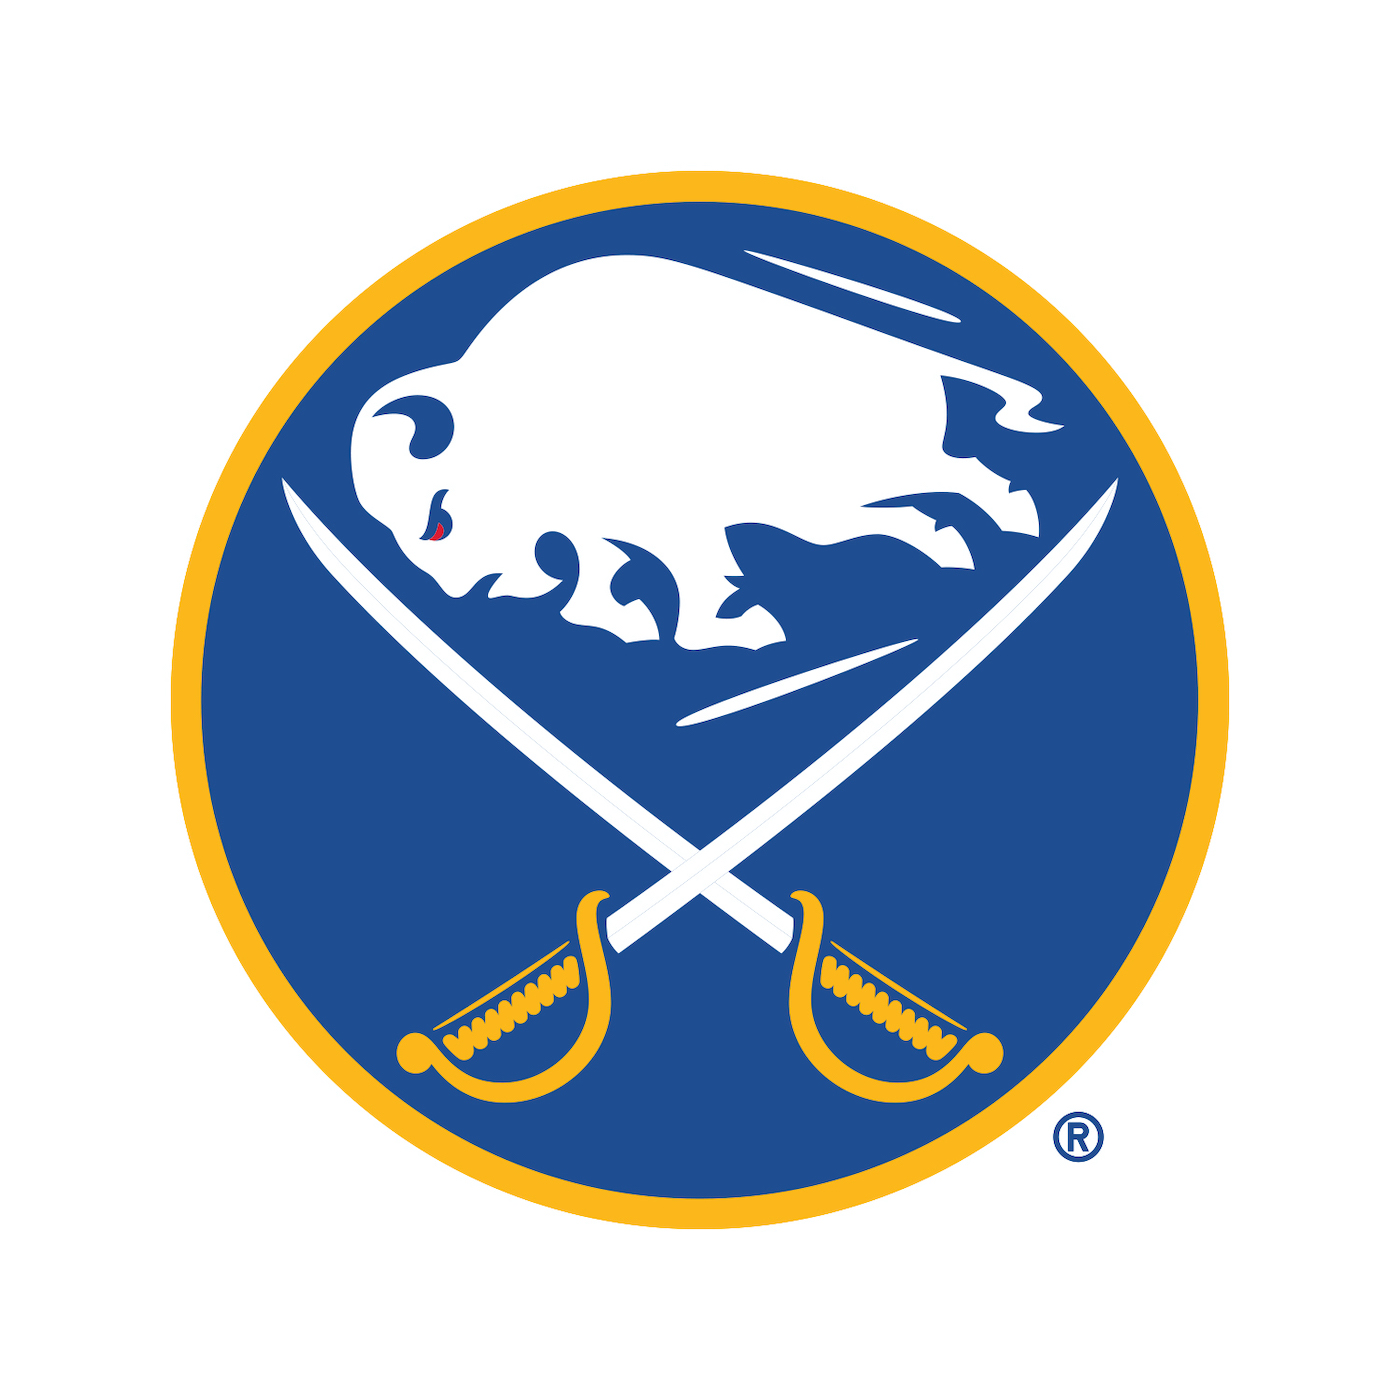 Images courtesy of the Buffalo Sabres.